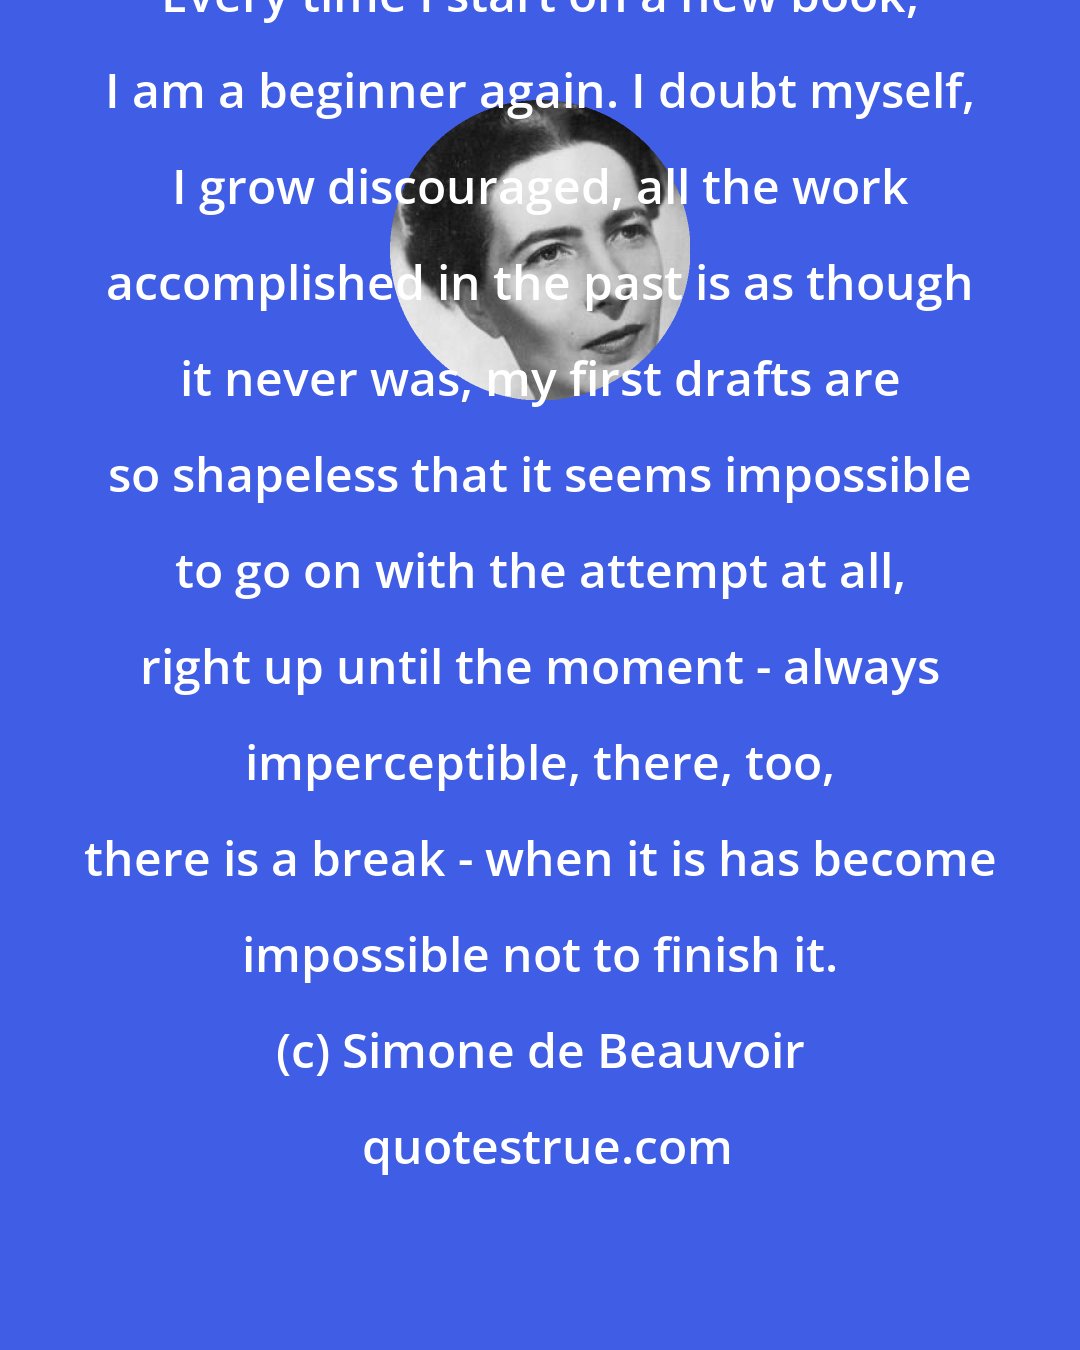 Simone de Beauvoir: Every time I start on a new book, I am a beginner again. I doubt myself, I grow discouraged, all the work accomplished in the past is as though it never was, my first drafts are so shapeless that it seems impossible to go on with the attempt at all, right up until the moment - always imperceptible, there, too, there is a break - when it is has become impossible not to finish it.